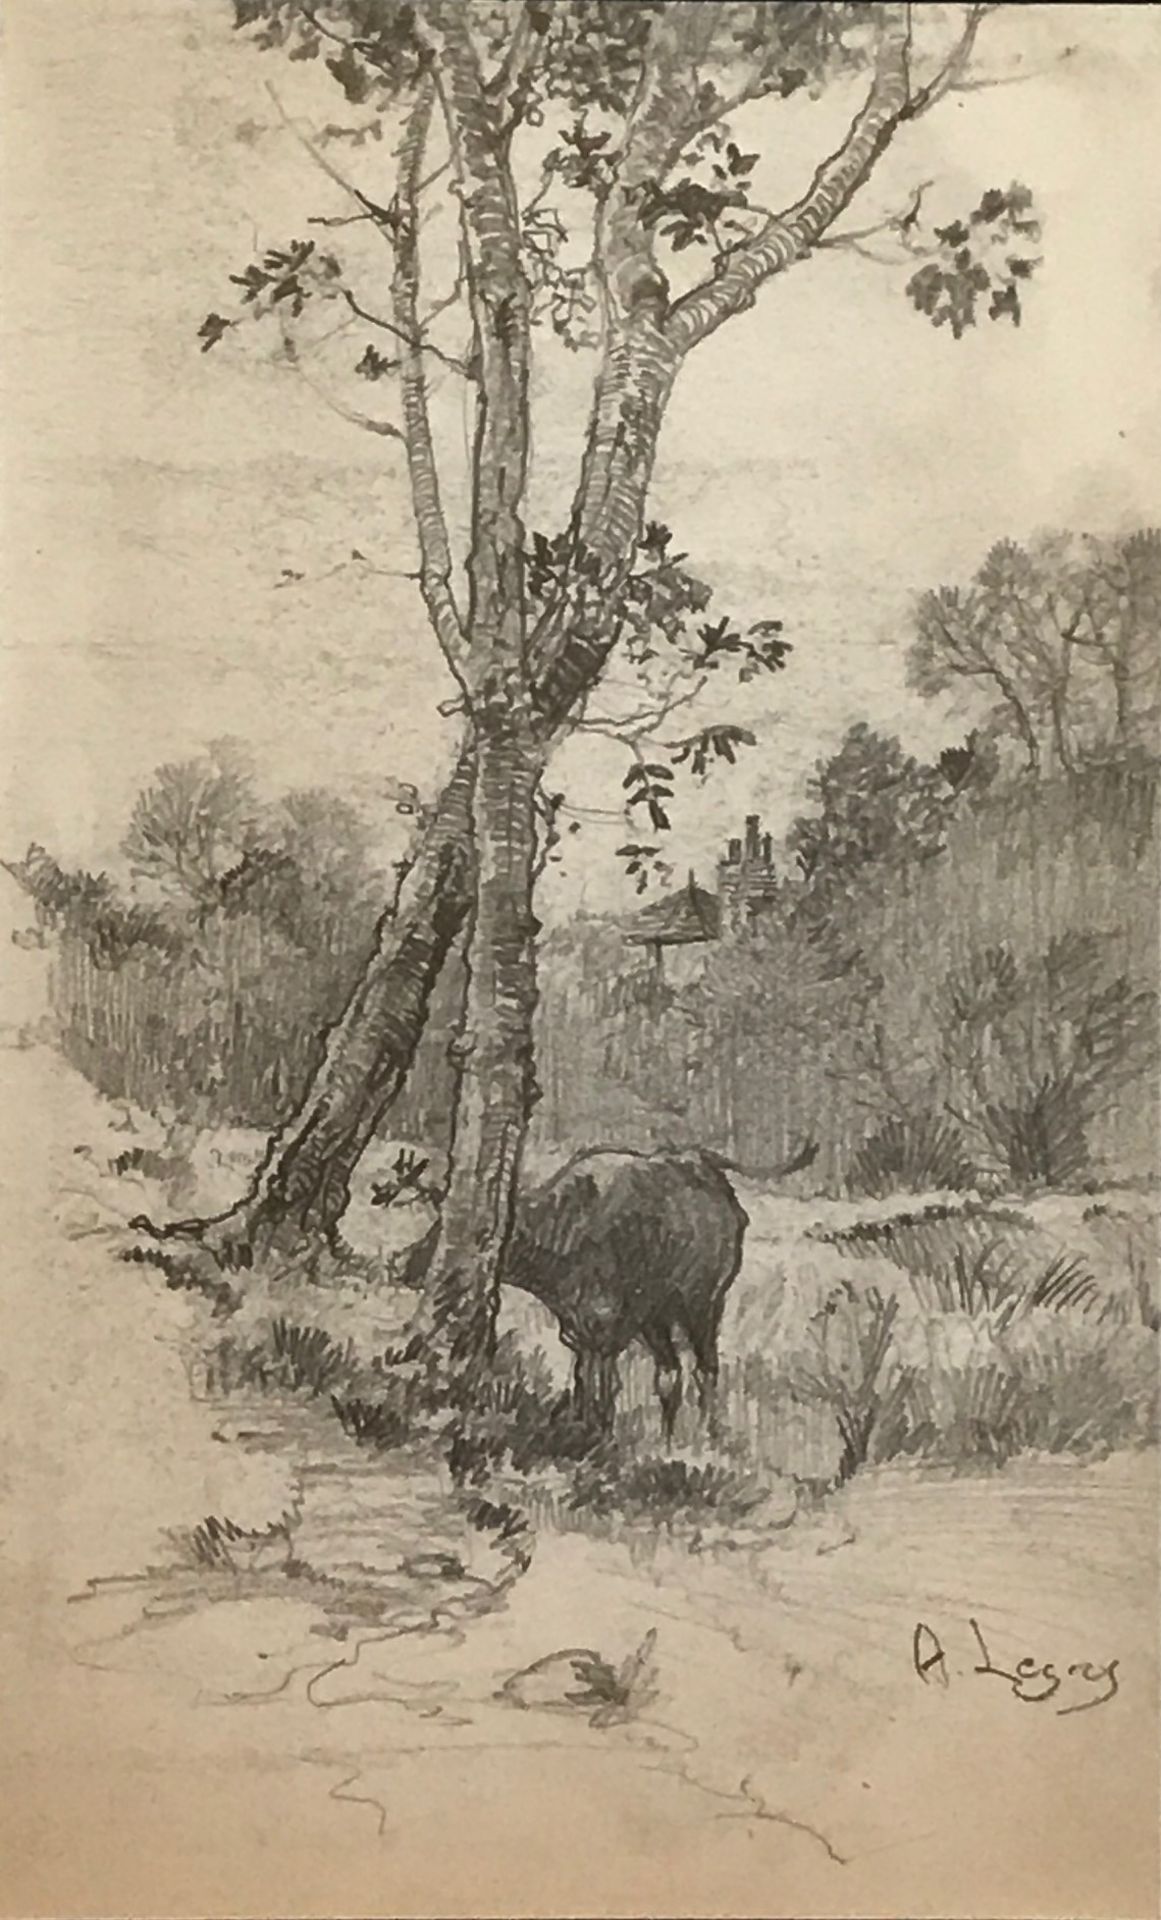 Cow at a water Meadow, Original pencil drawing by Alphonse Legros 1837-1911, Exhibited R.A, R.S.A